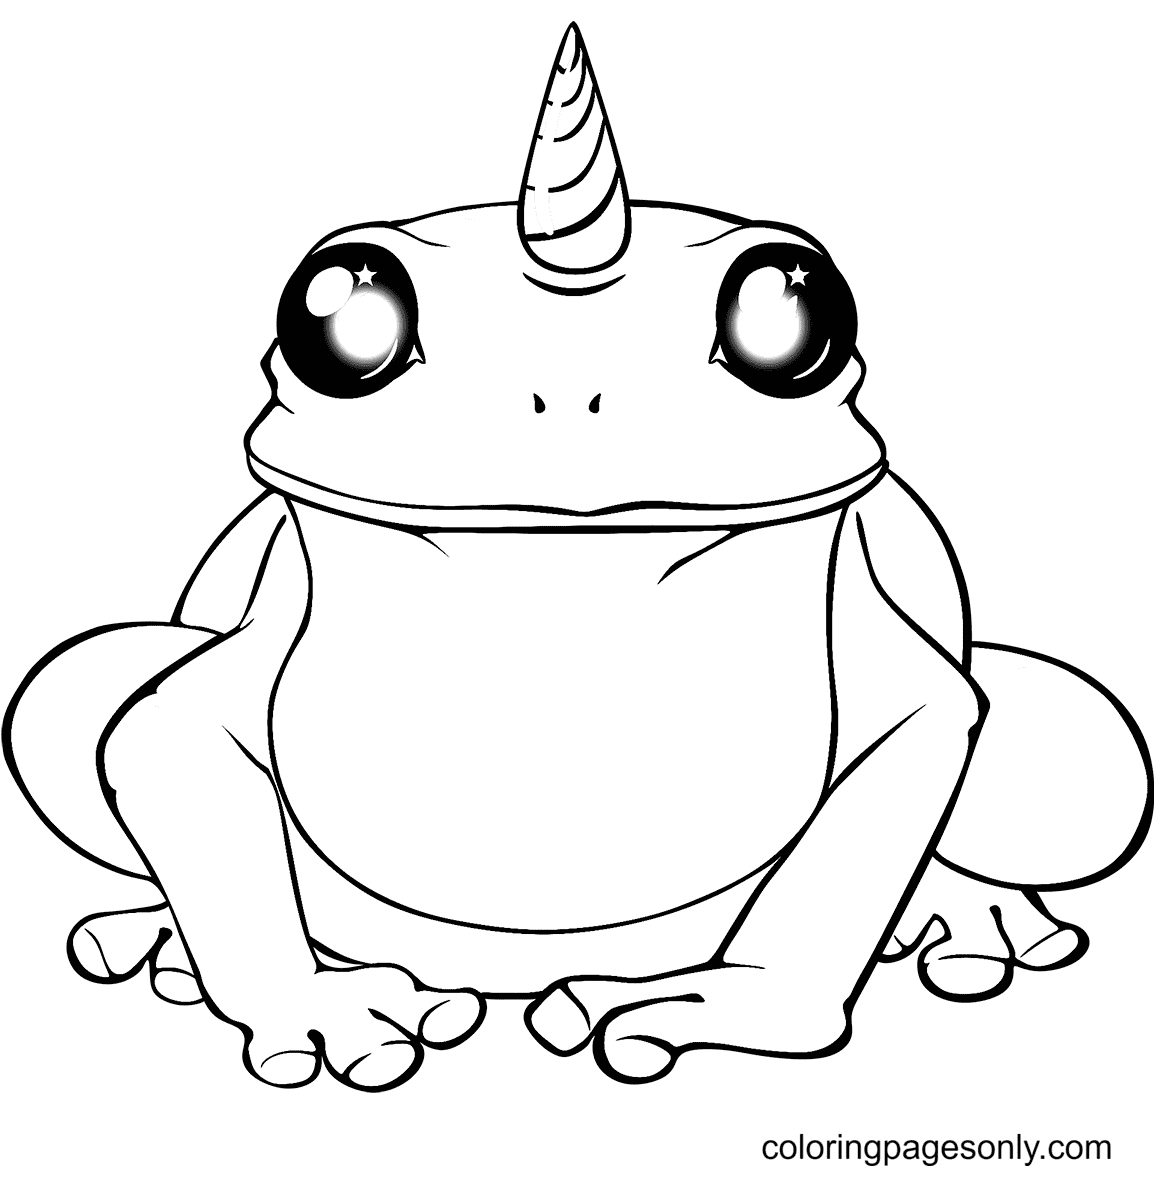 Frog Coloring Pages - Coloring Pages For Kids And Adults